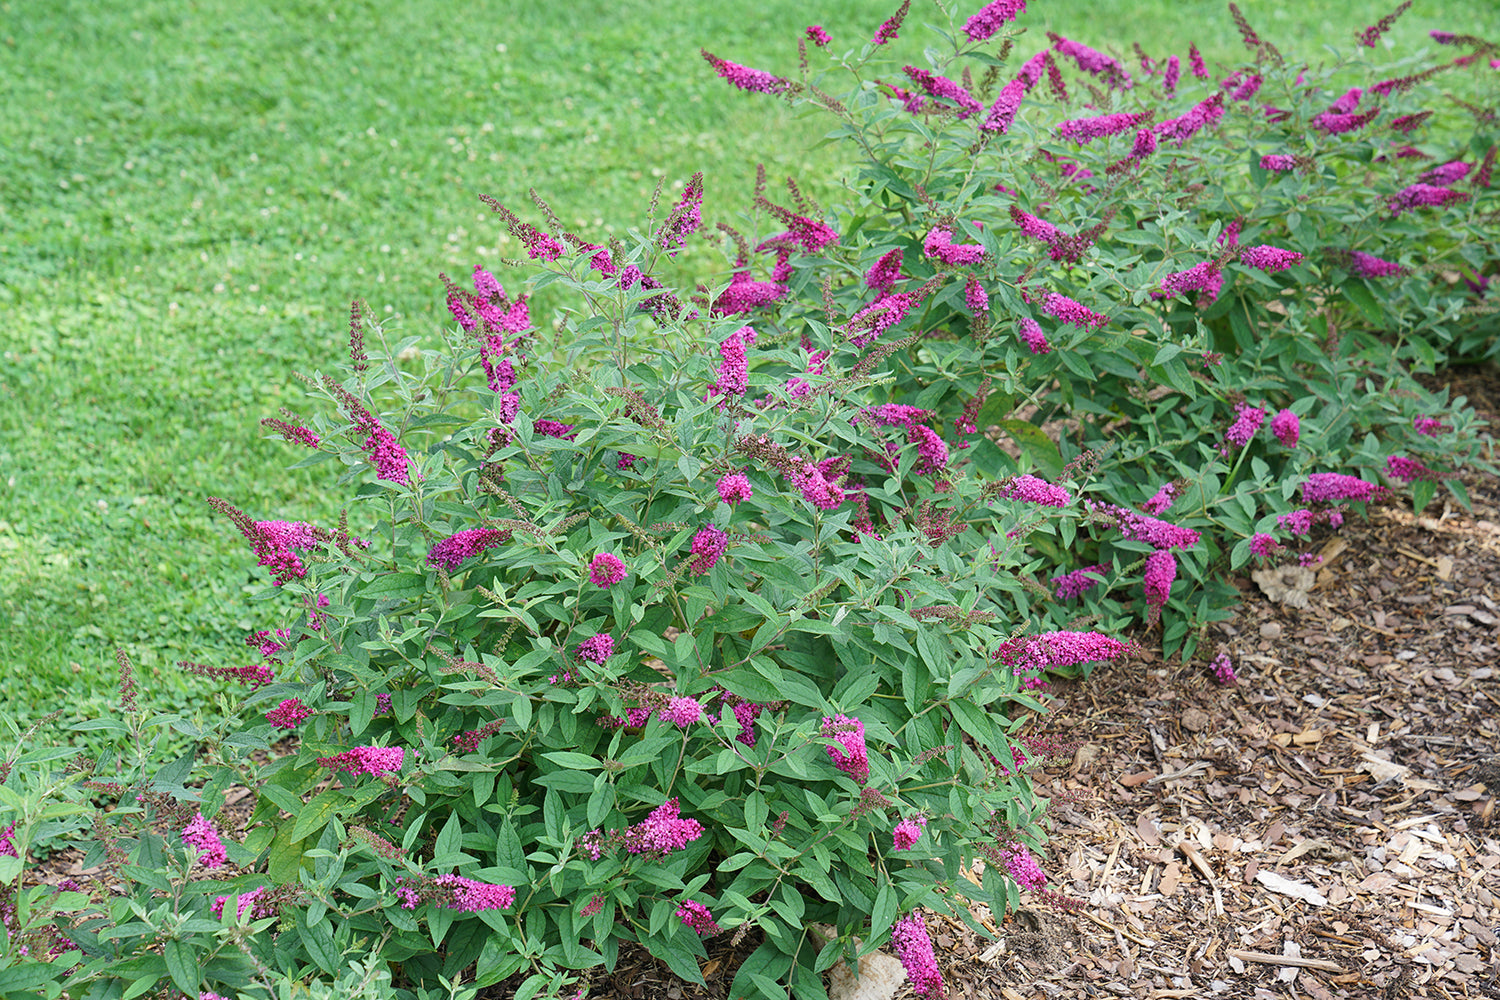 Buddleia Lo &amp; Behold Ruby Chip has bright blooms with a compact habit